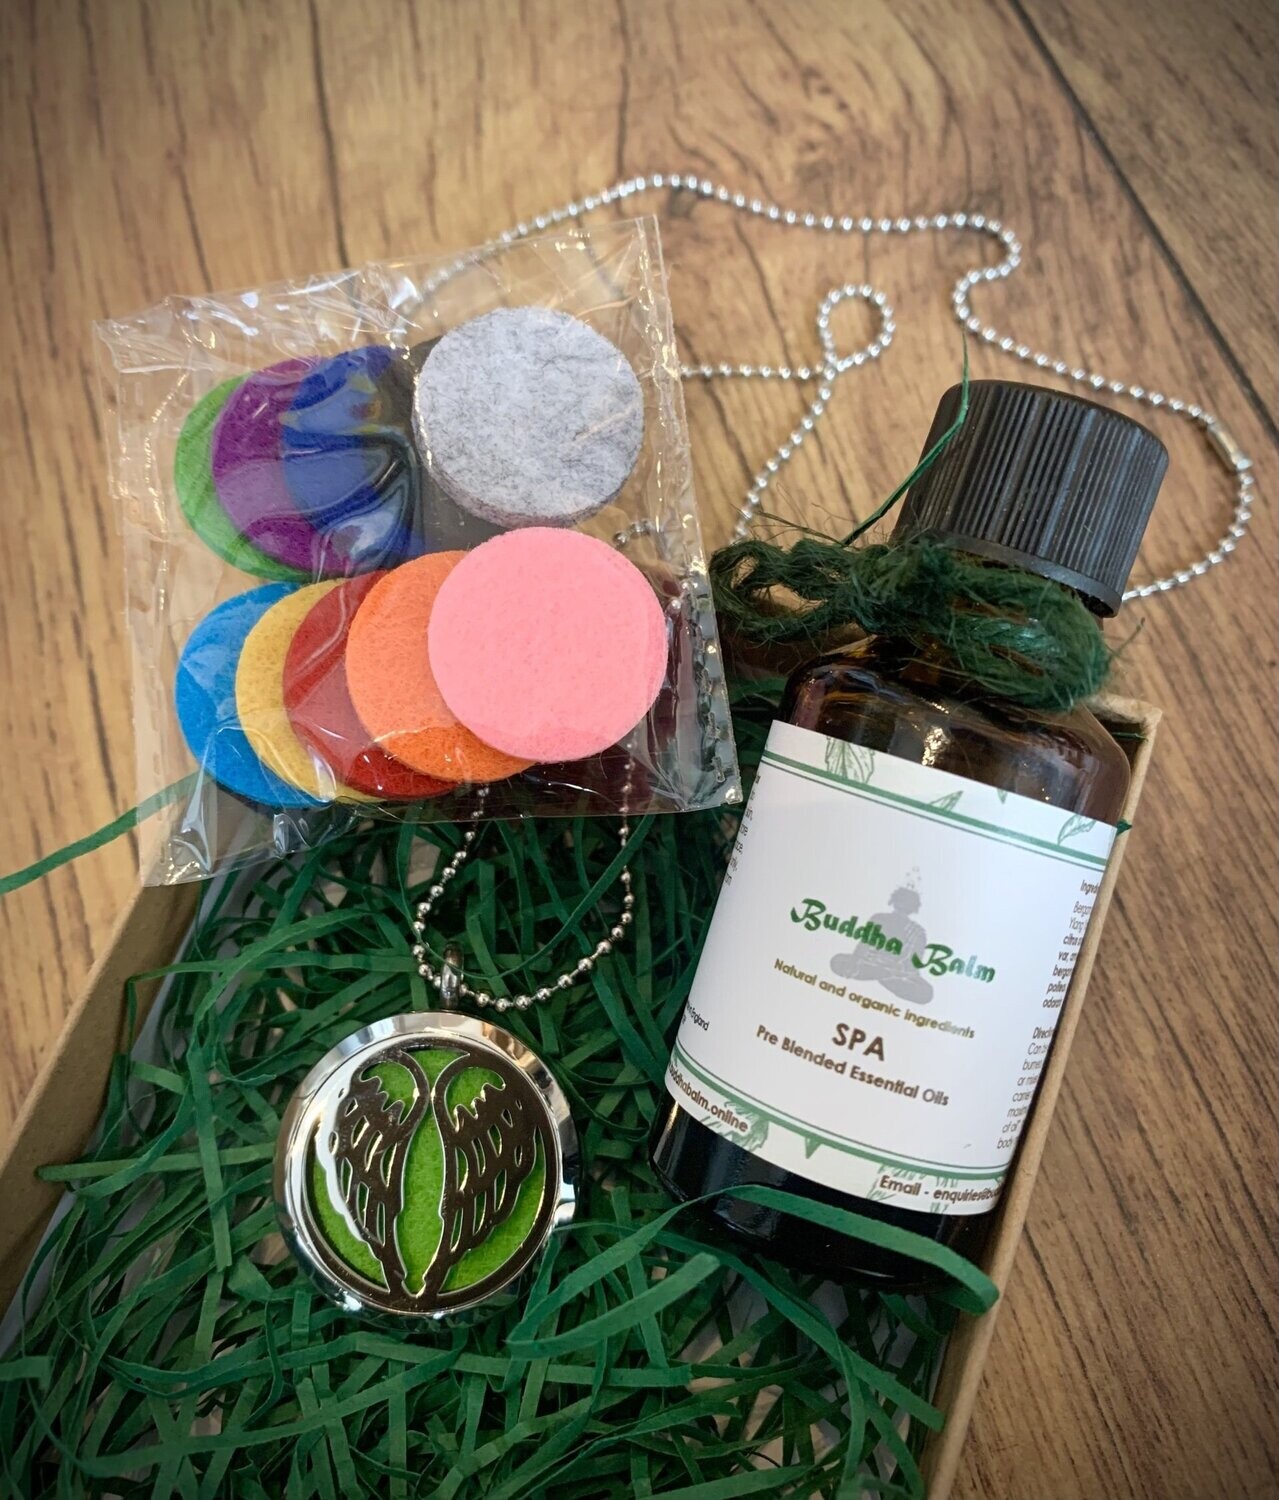 Buddha Balm Aromatherapy Angel Wing Necklace Gift Set - Spa Essential Oil  Blend 25ml